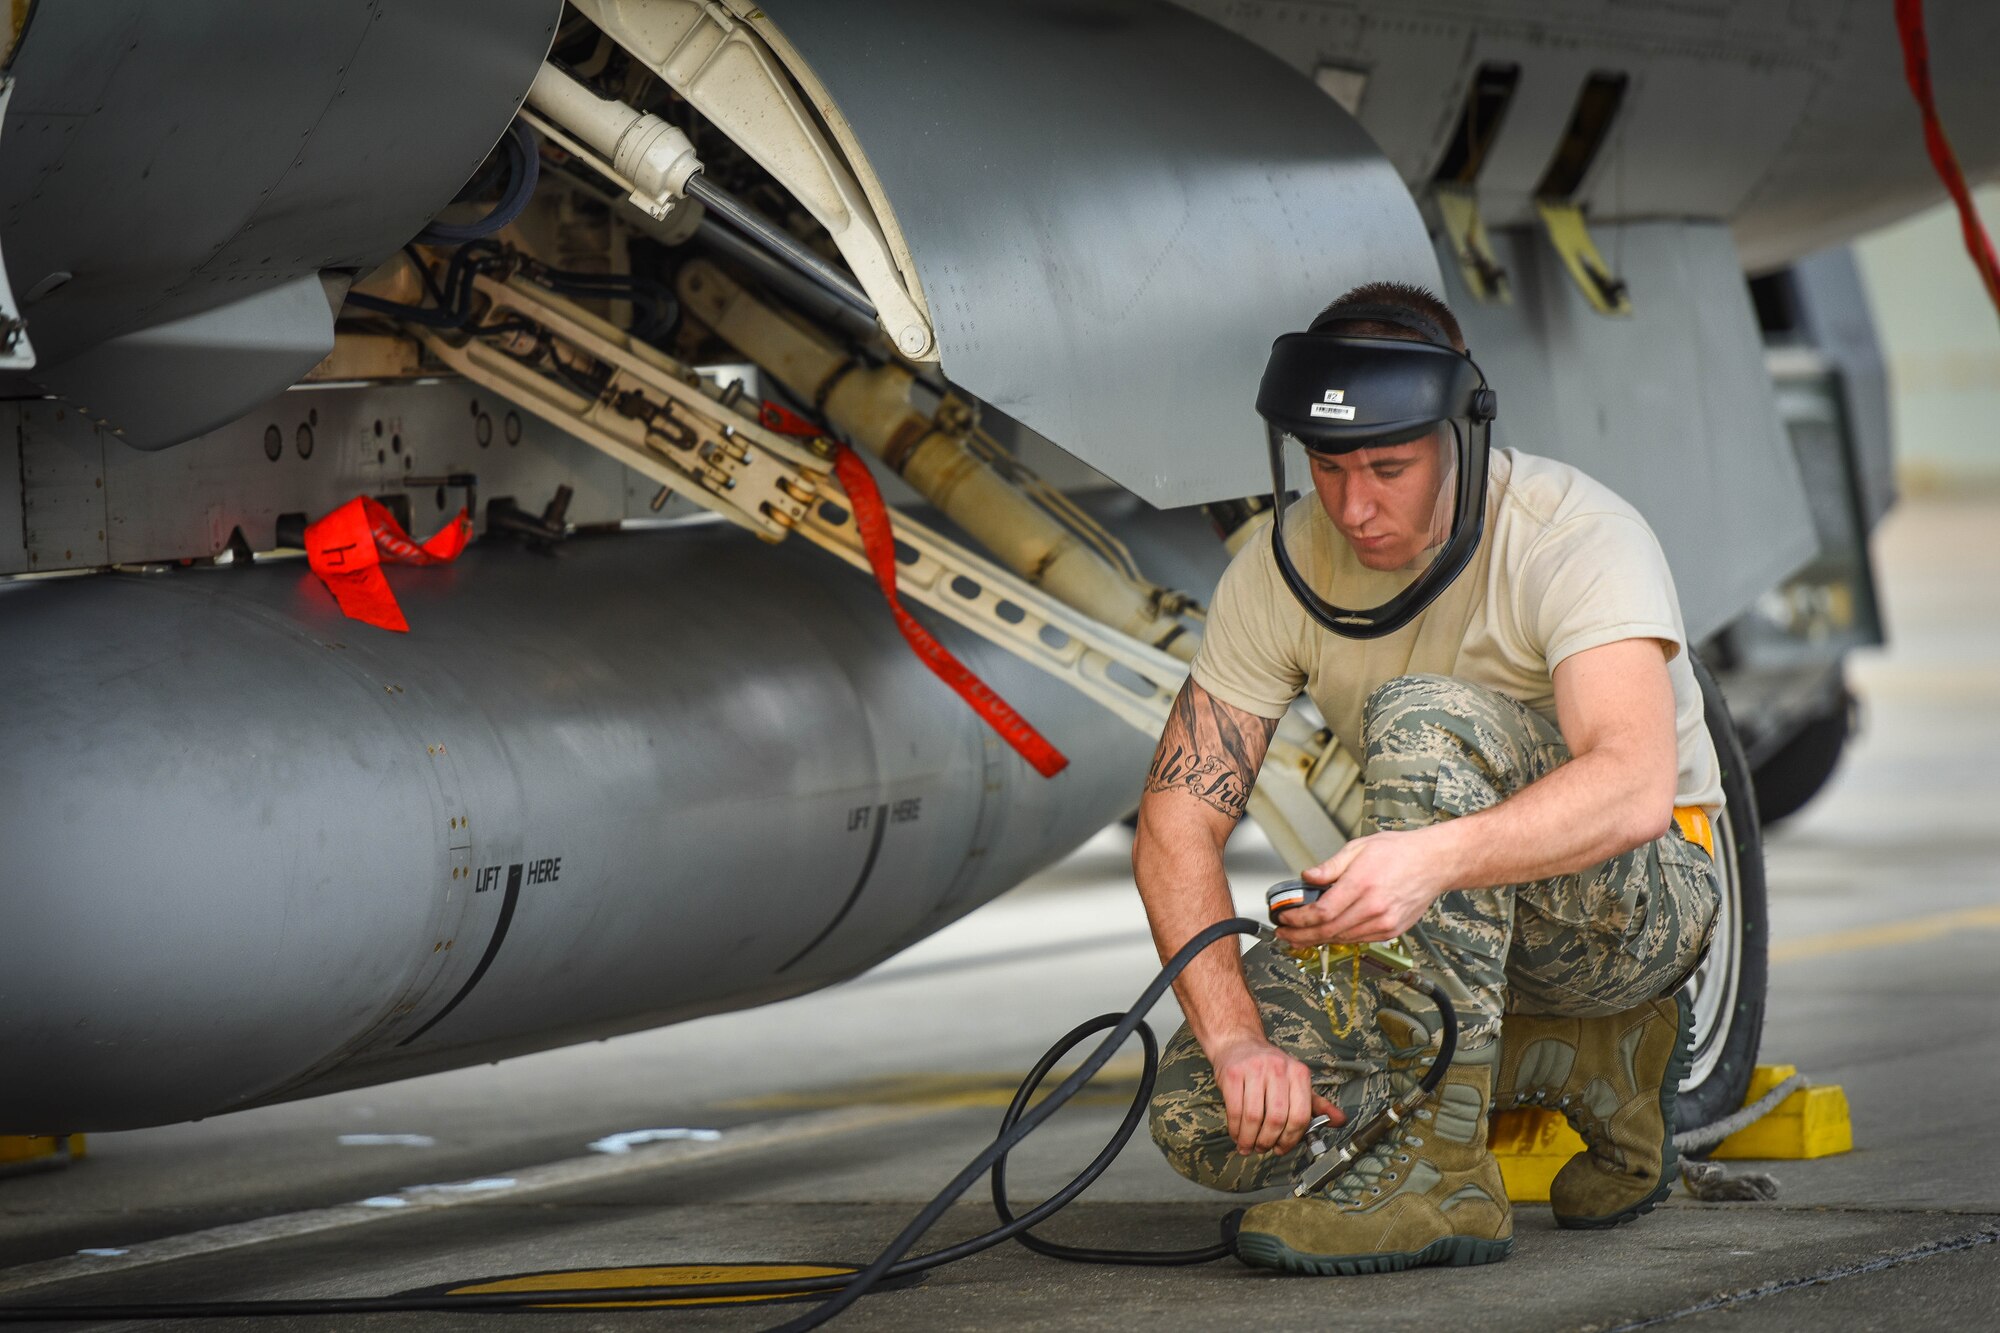 Senior Airman Josh Miller inflates tires of an F-16C Fighting Falcon Jan.12, 2015, on the flight line of Naval Station Key West, Boca Chica Island, Florida. The 180th Fighter Wing deployed to Key West, Florida, to conduct aircraft training with F-5’s from the Naval Station Key West, and F-15 Eagle’s from the 159th Fighter Wing in New Orleans, Louisiana. Miller is a 180th Fighter Wing crew chief. (U.S. Air National Guard photo/Staff Sgt. Amber Williams)